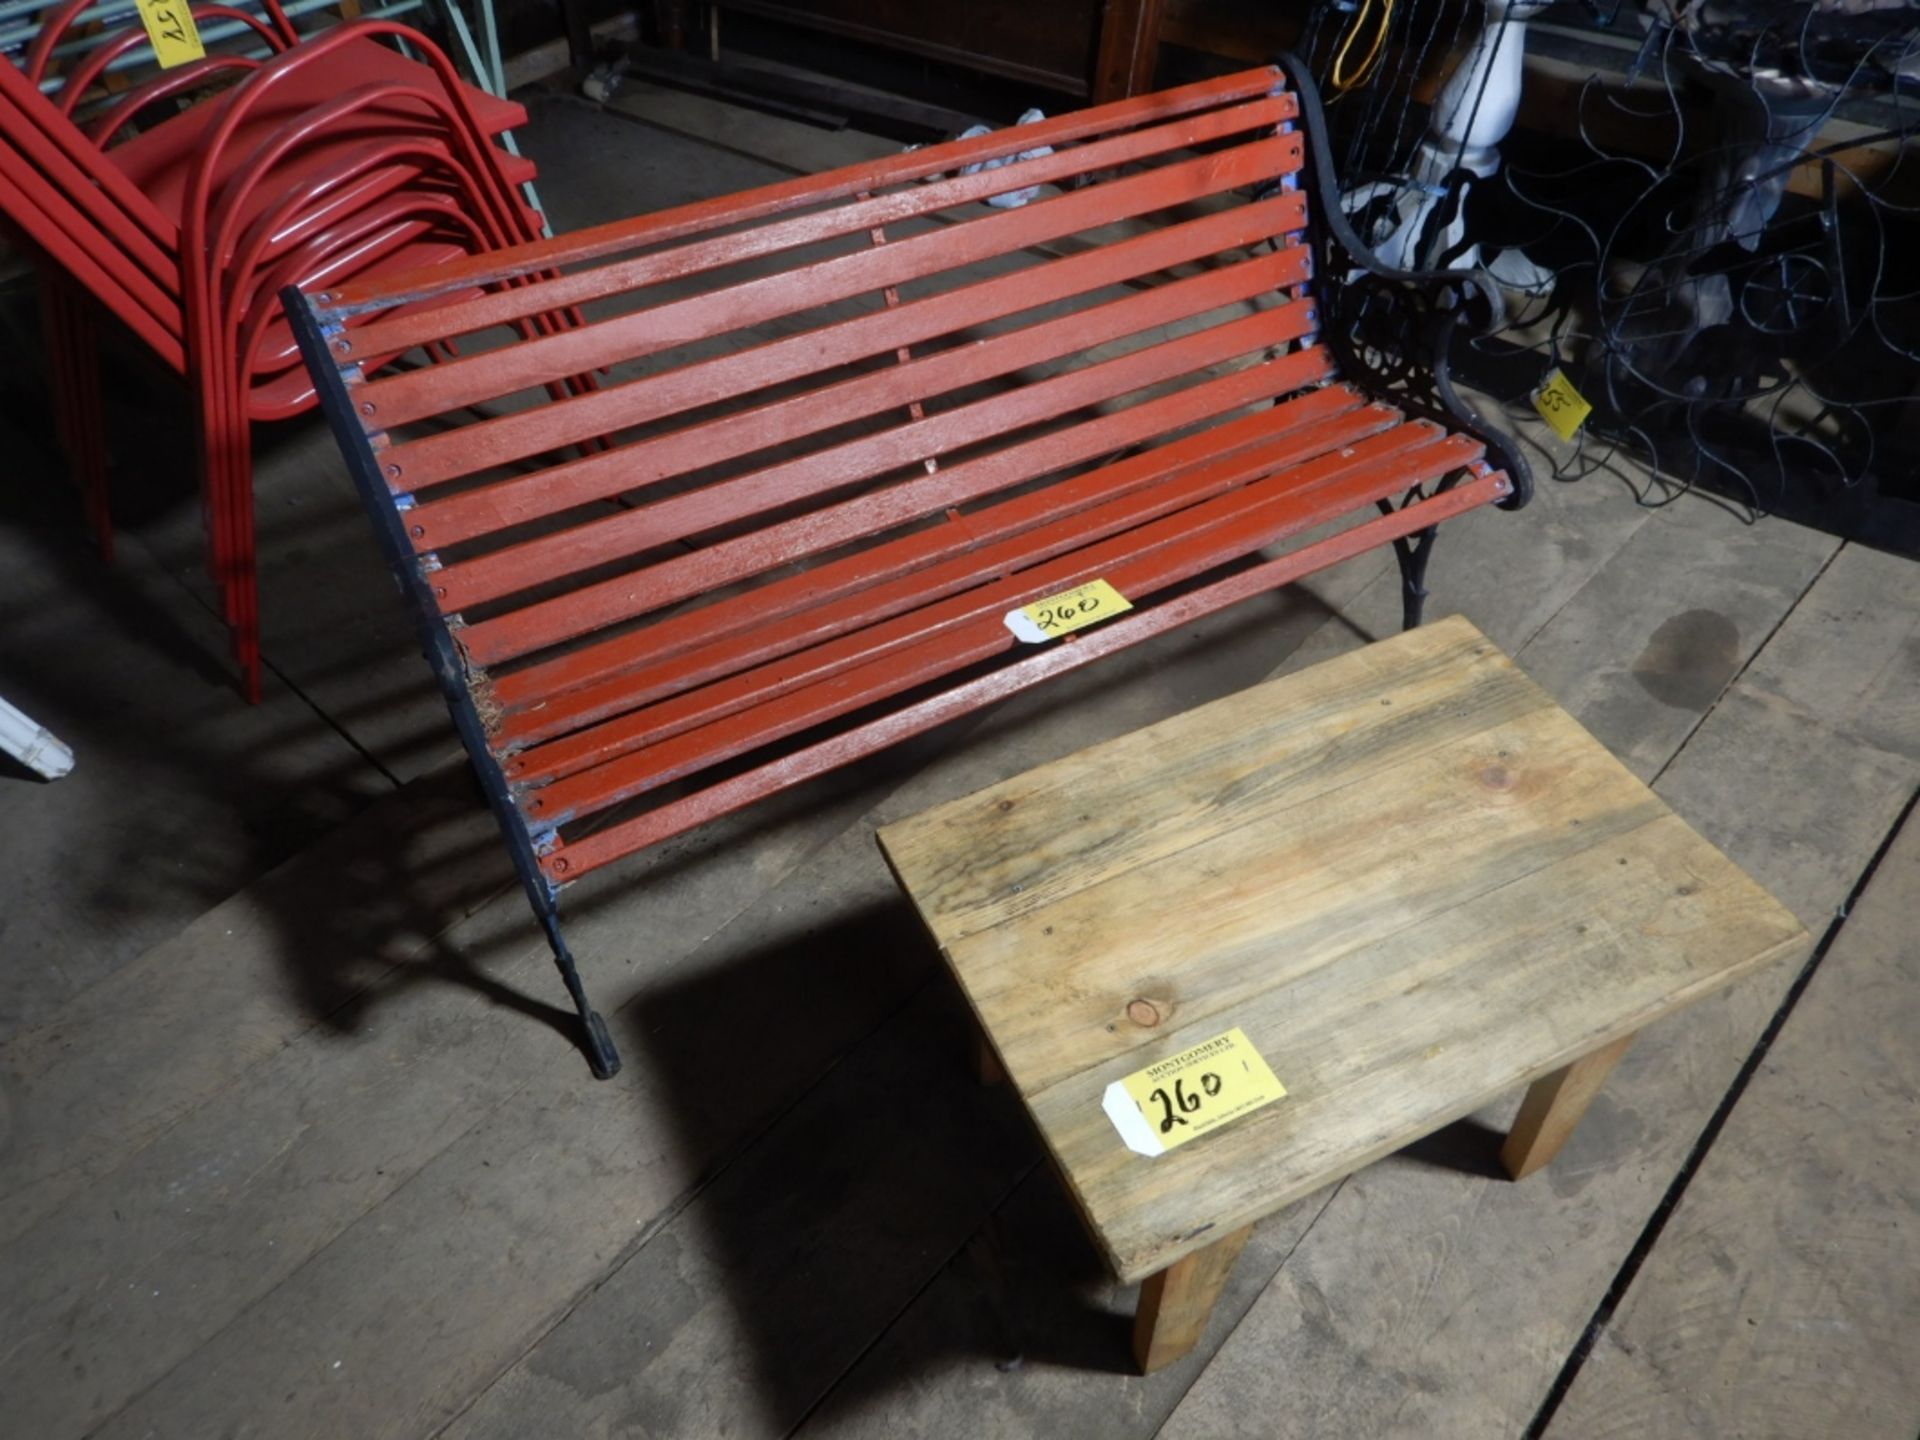 PARK/PATIO 50" WOOD & STEEL BENCH, 17"X28" WOOD TABLE